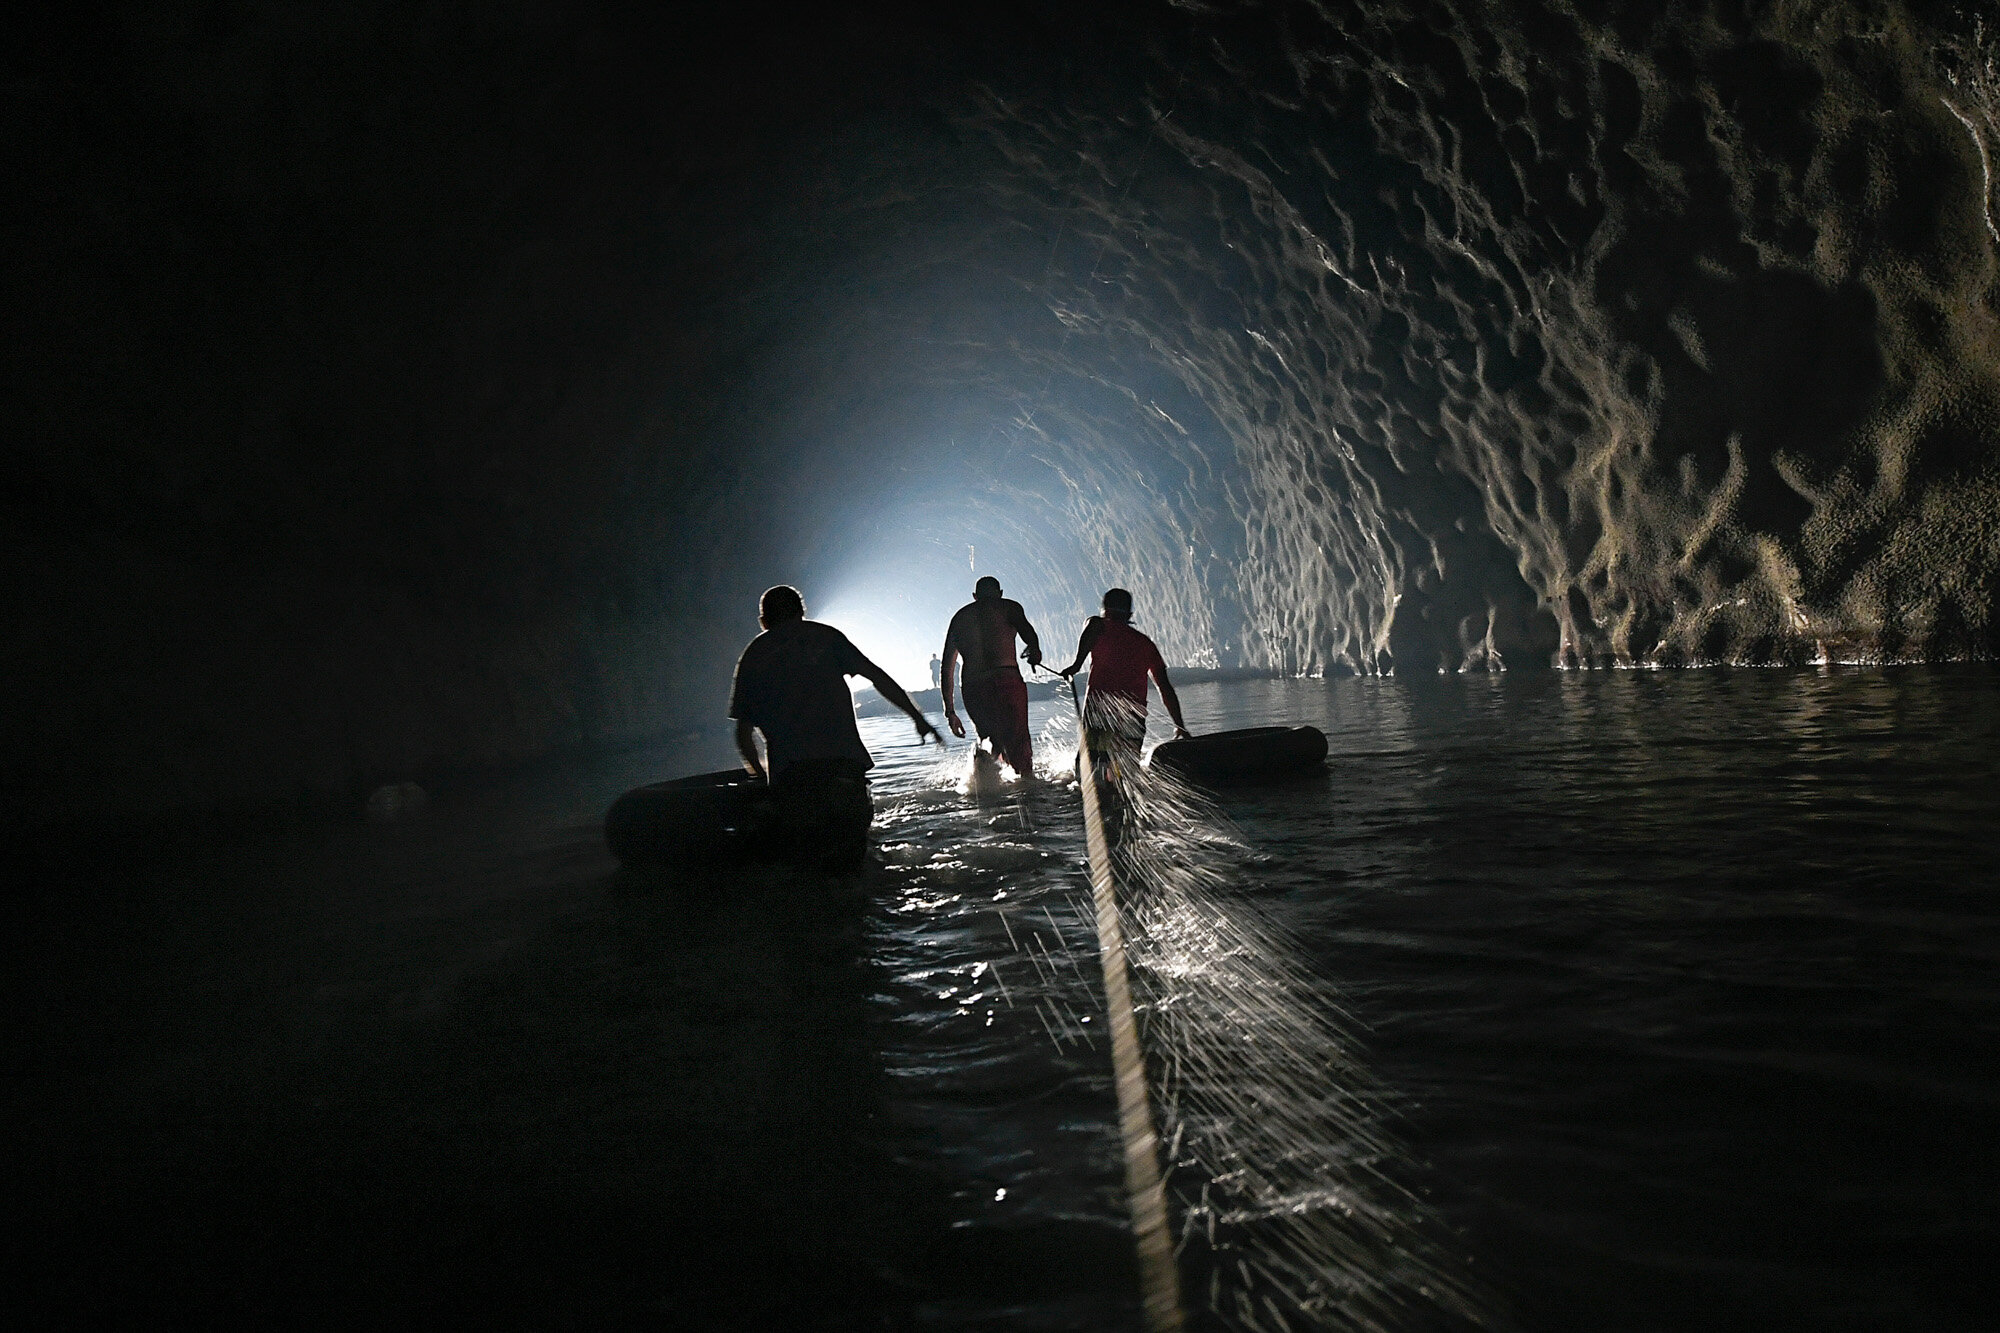  Men with inner tubes wade through an abandoned highway tunnel with the aid of a safety line as they work to repair a self-created water system in the Esperanza neighborhood of Caracas, Venezuela, on June 11, 2020. Water service in Venezuela has gott